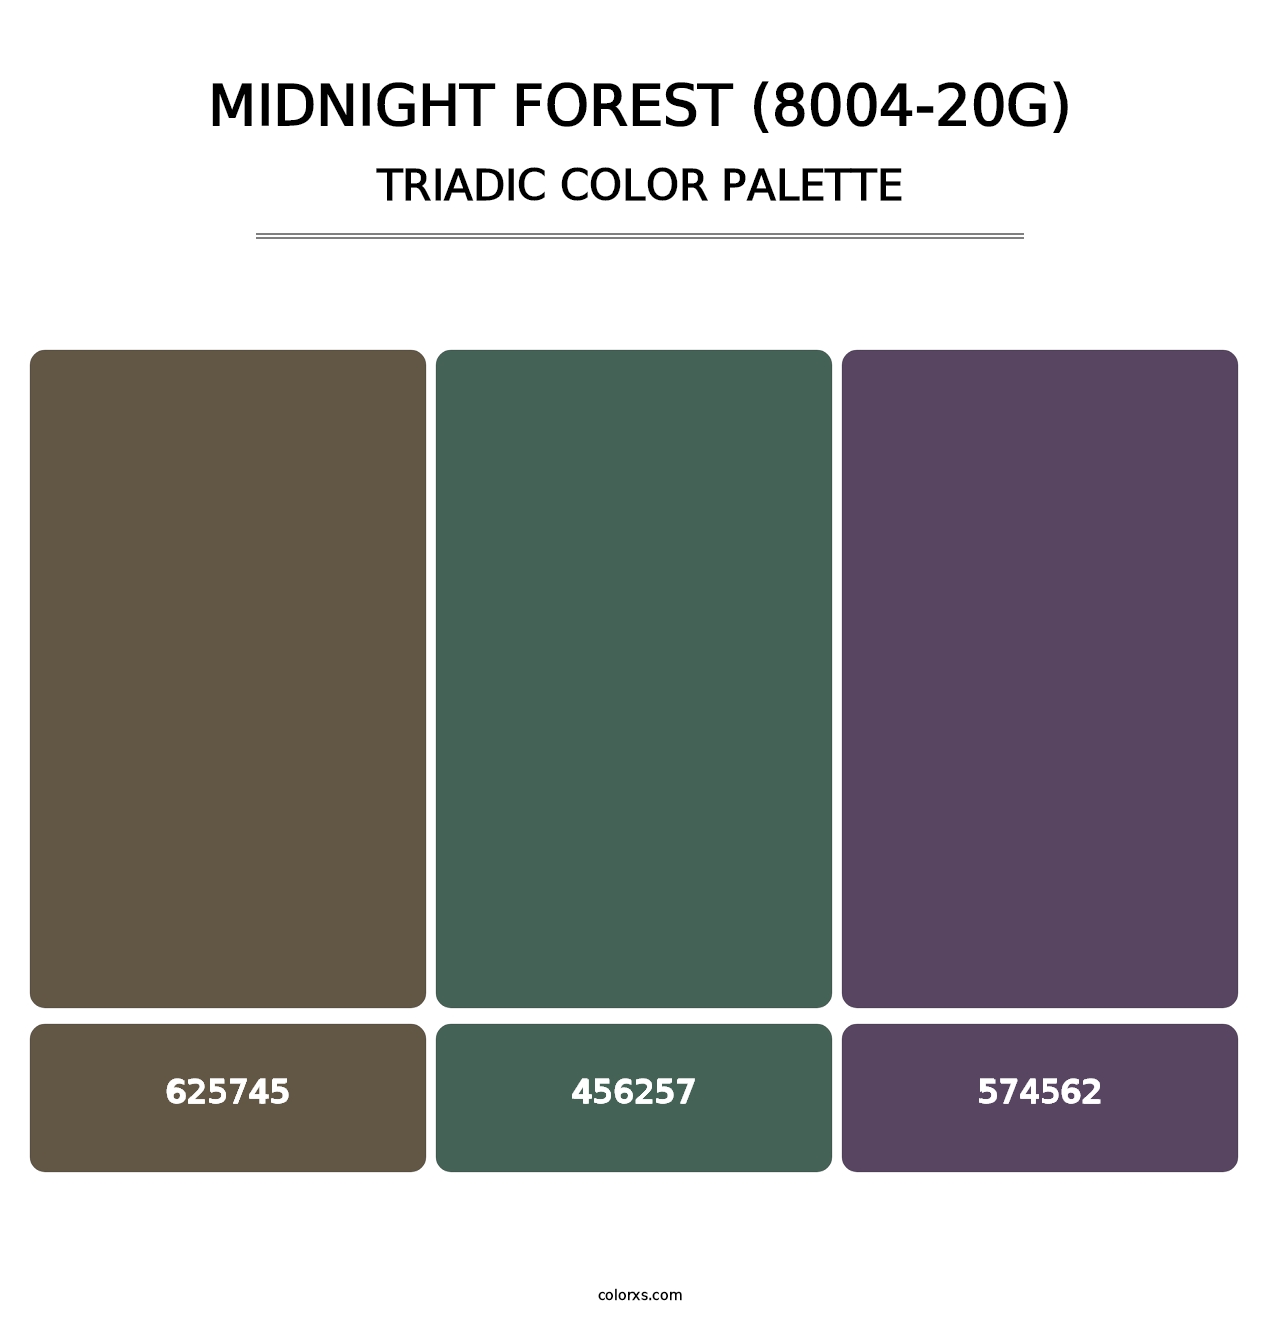 Midnight Forest (8004-20G) - Triadic Color Palette